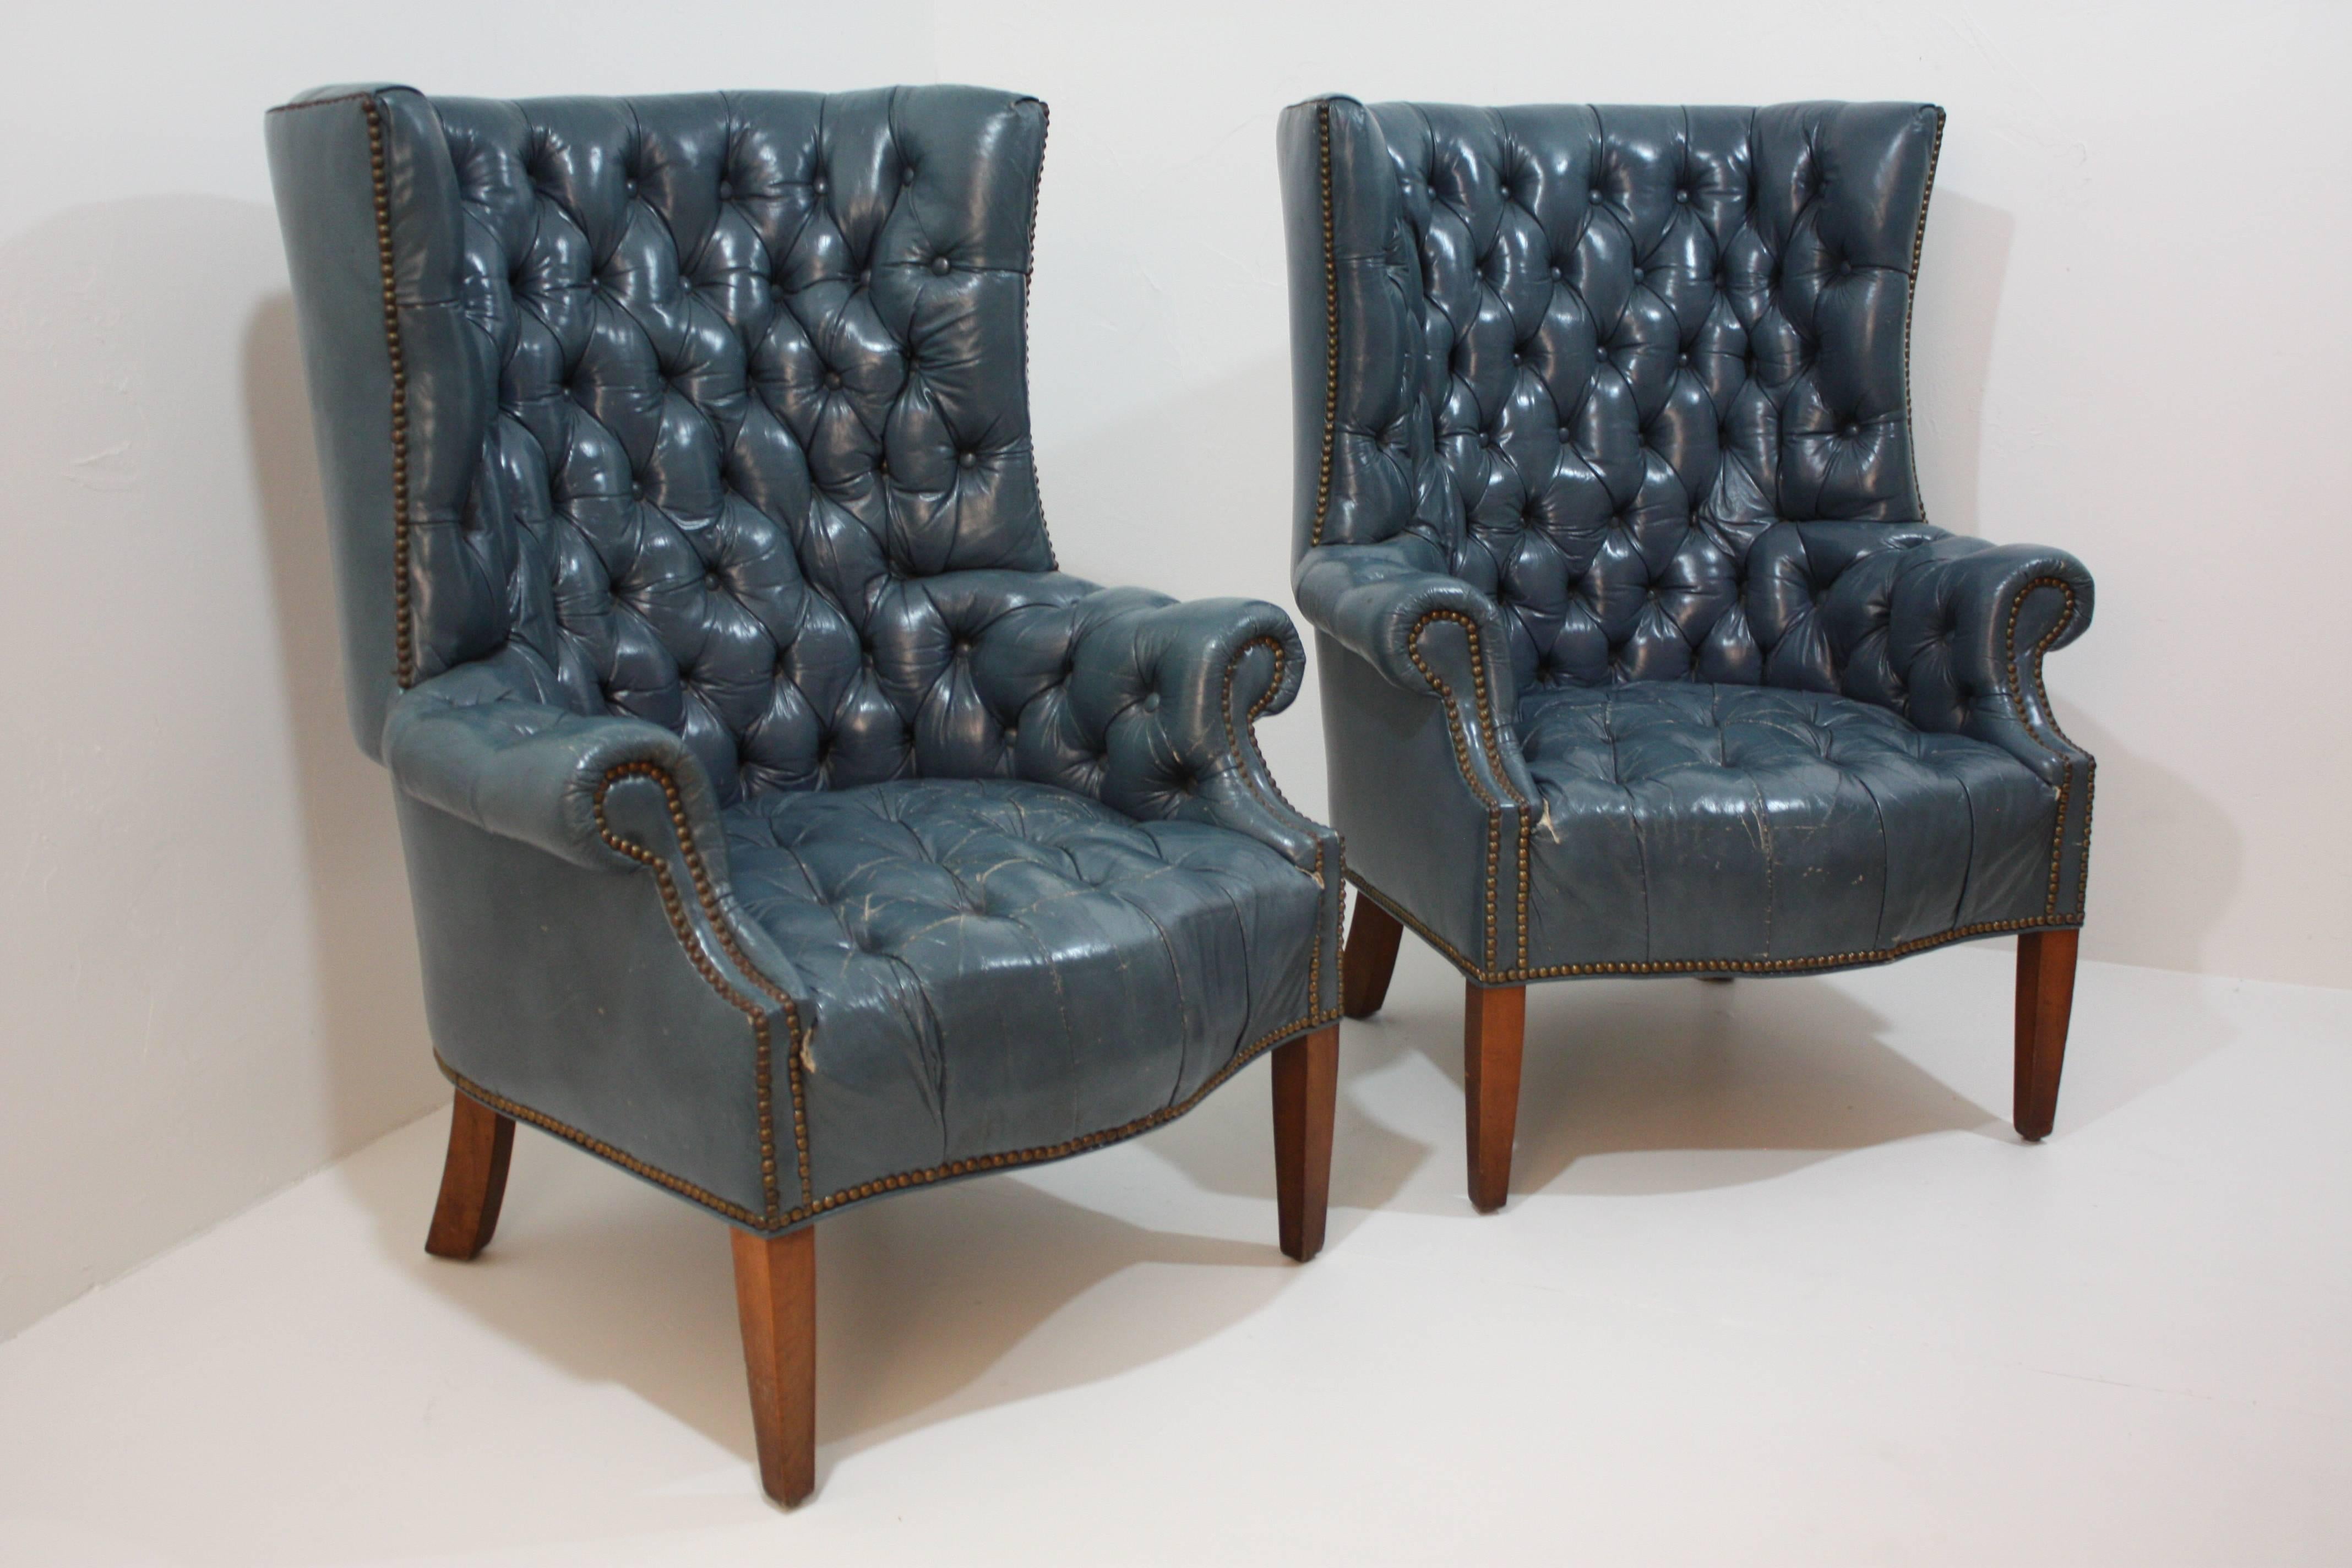 Wonderful leather tufted curved back chairs with brass tacks and wood legs.